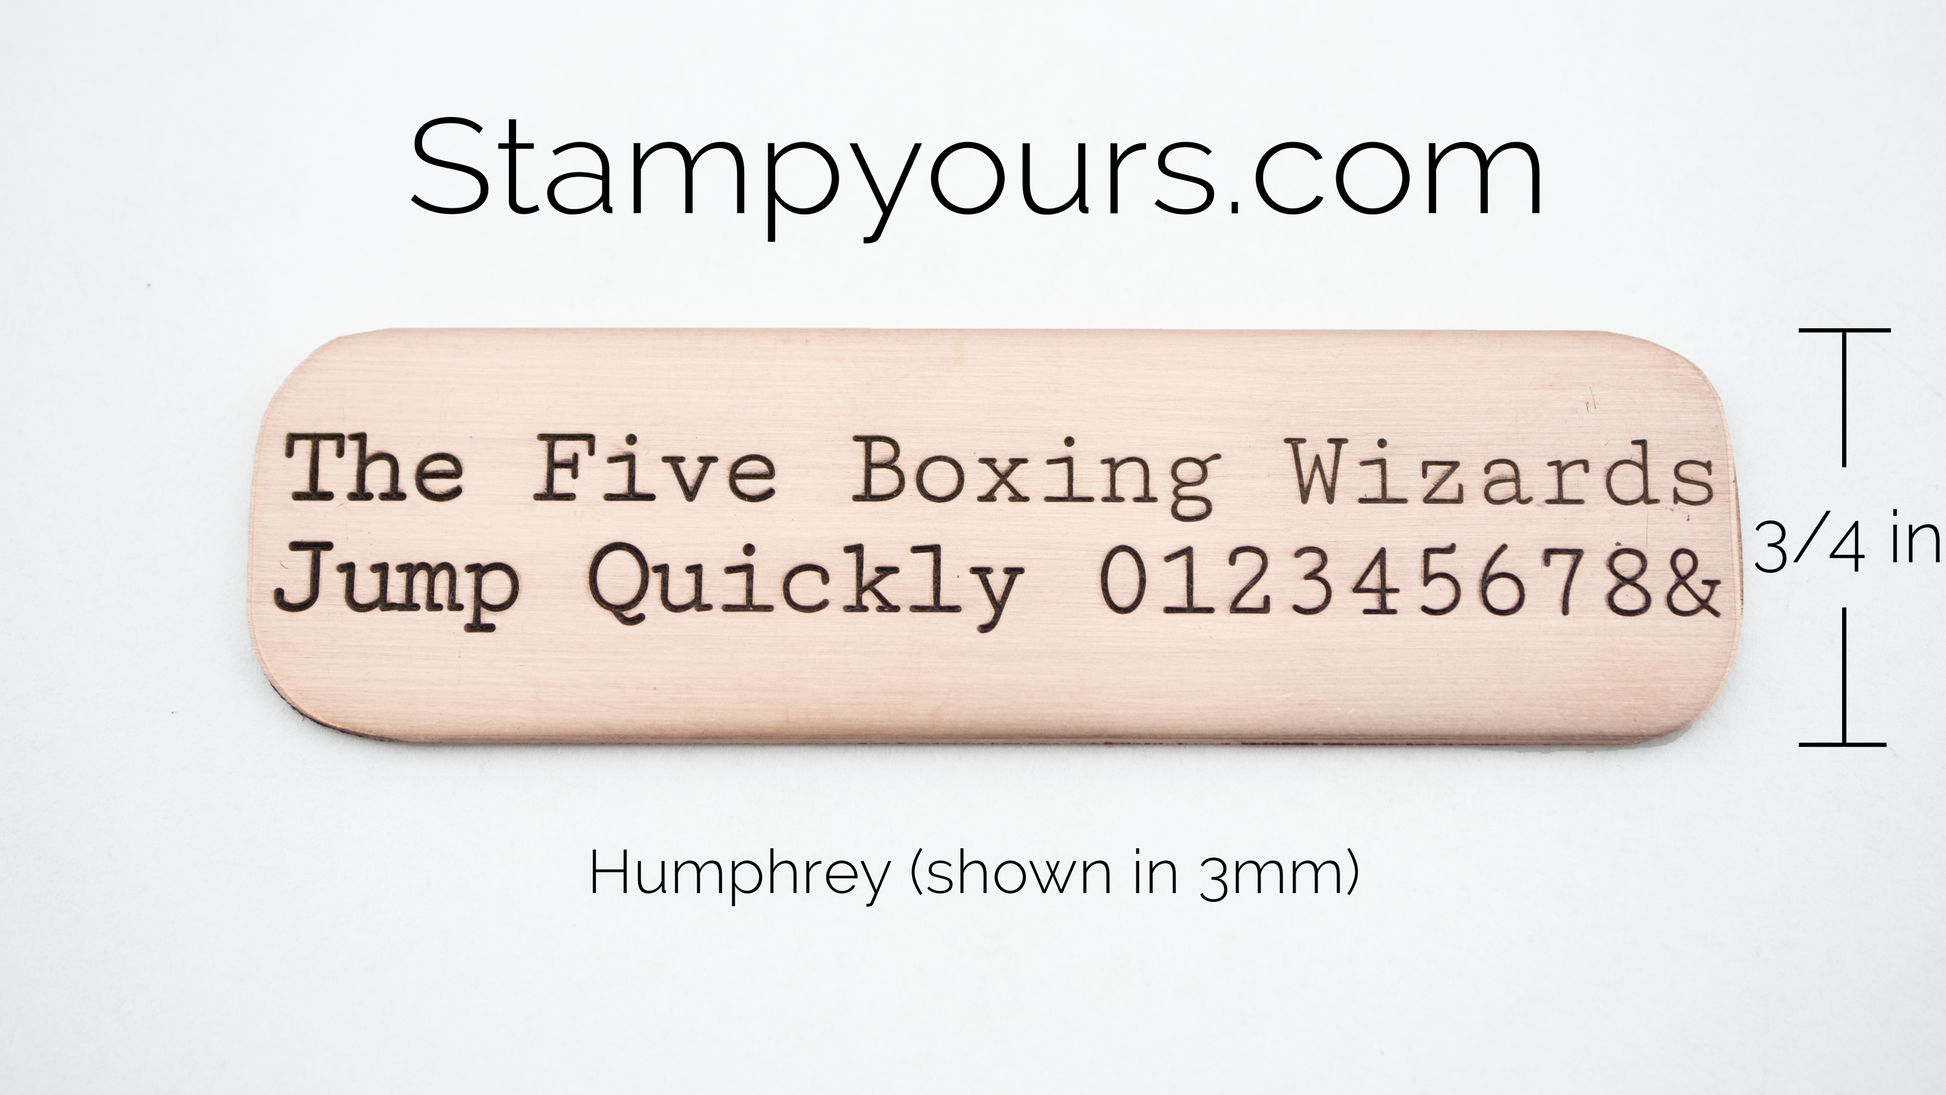 Humphrey ( 1mm - 6mm ) - Stamp Yours